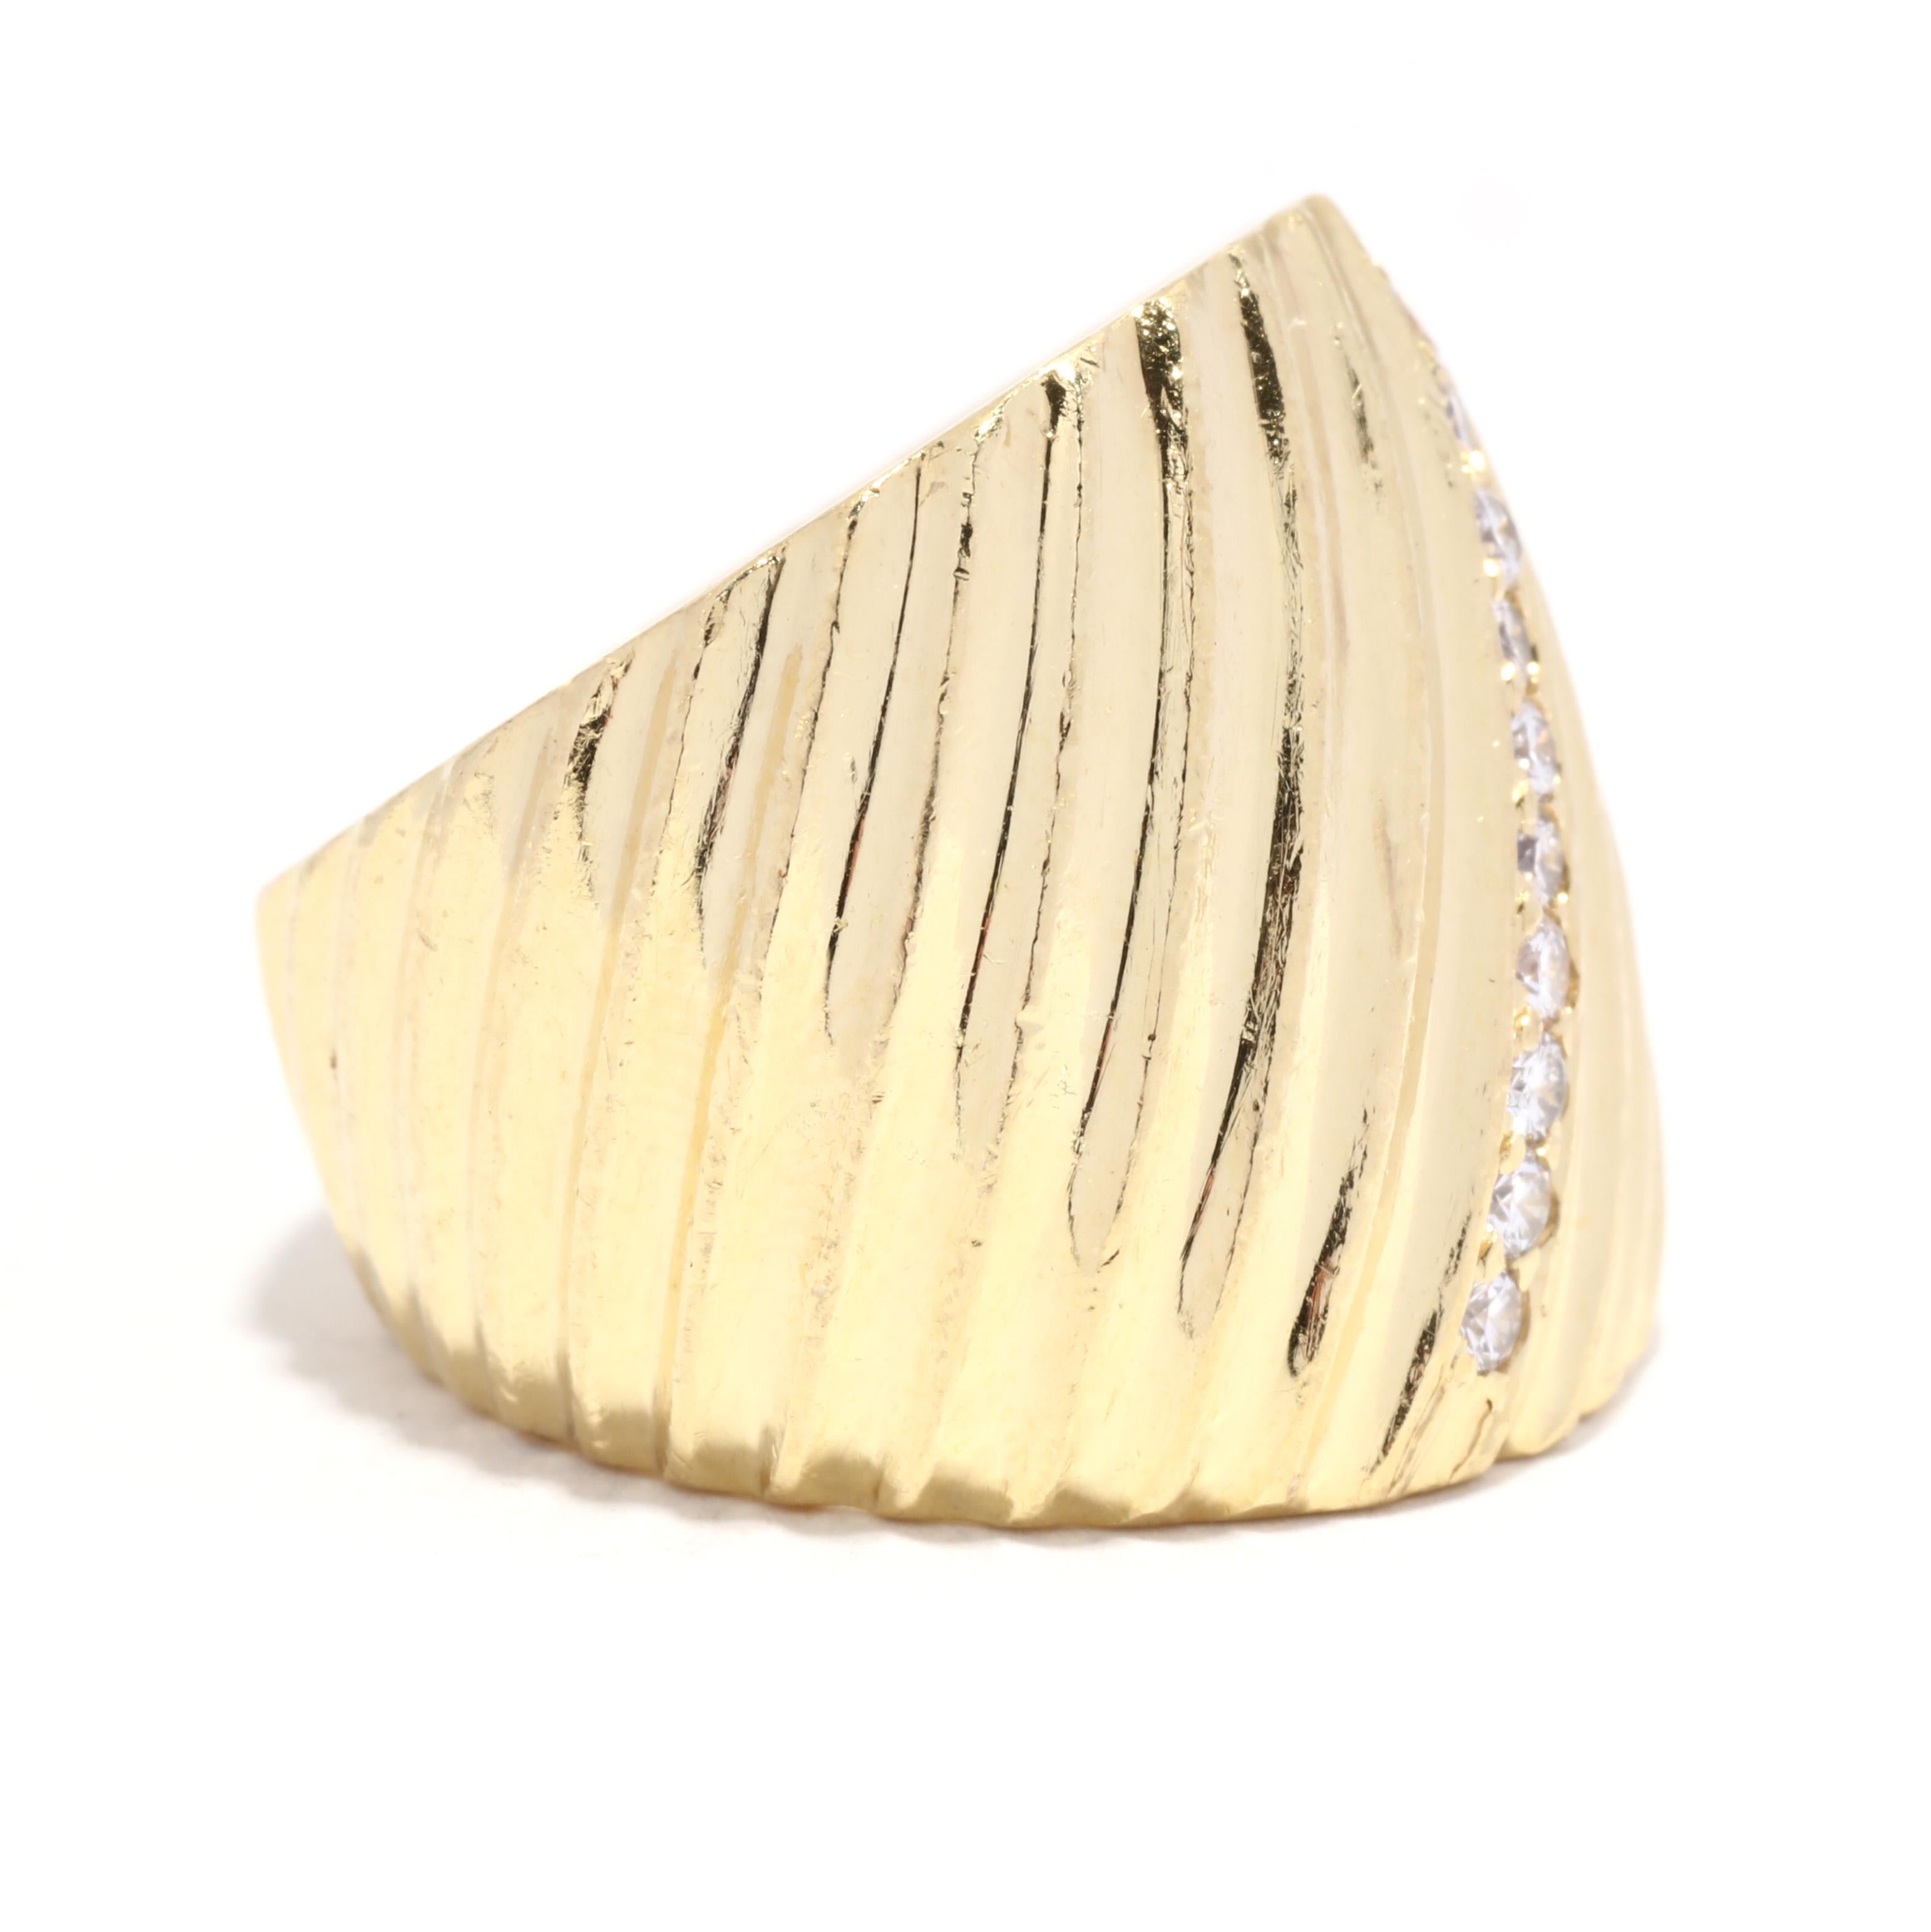 A vintage 18 karat yellow gold heavy wide diamond ridged ring. This solid gold ring features a wide tapered design with a diagonal ridged motif set with a row of round brilliant cut diamonds weighing approximately .20 total carats.

Stones:
-